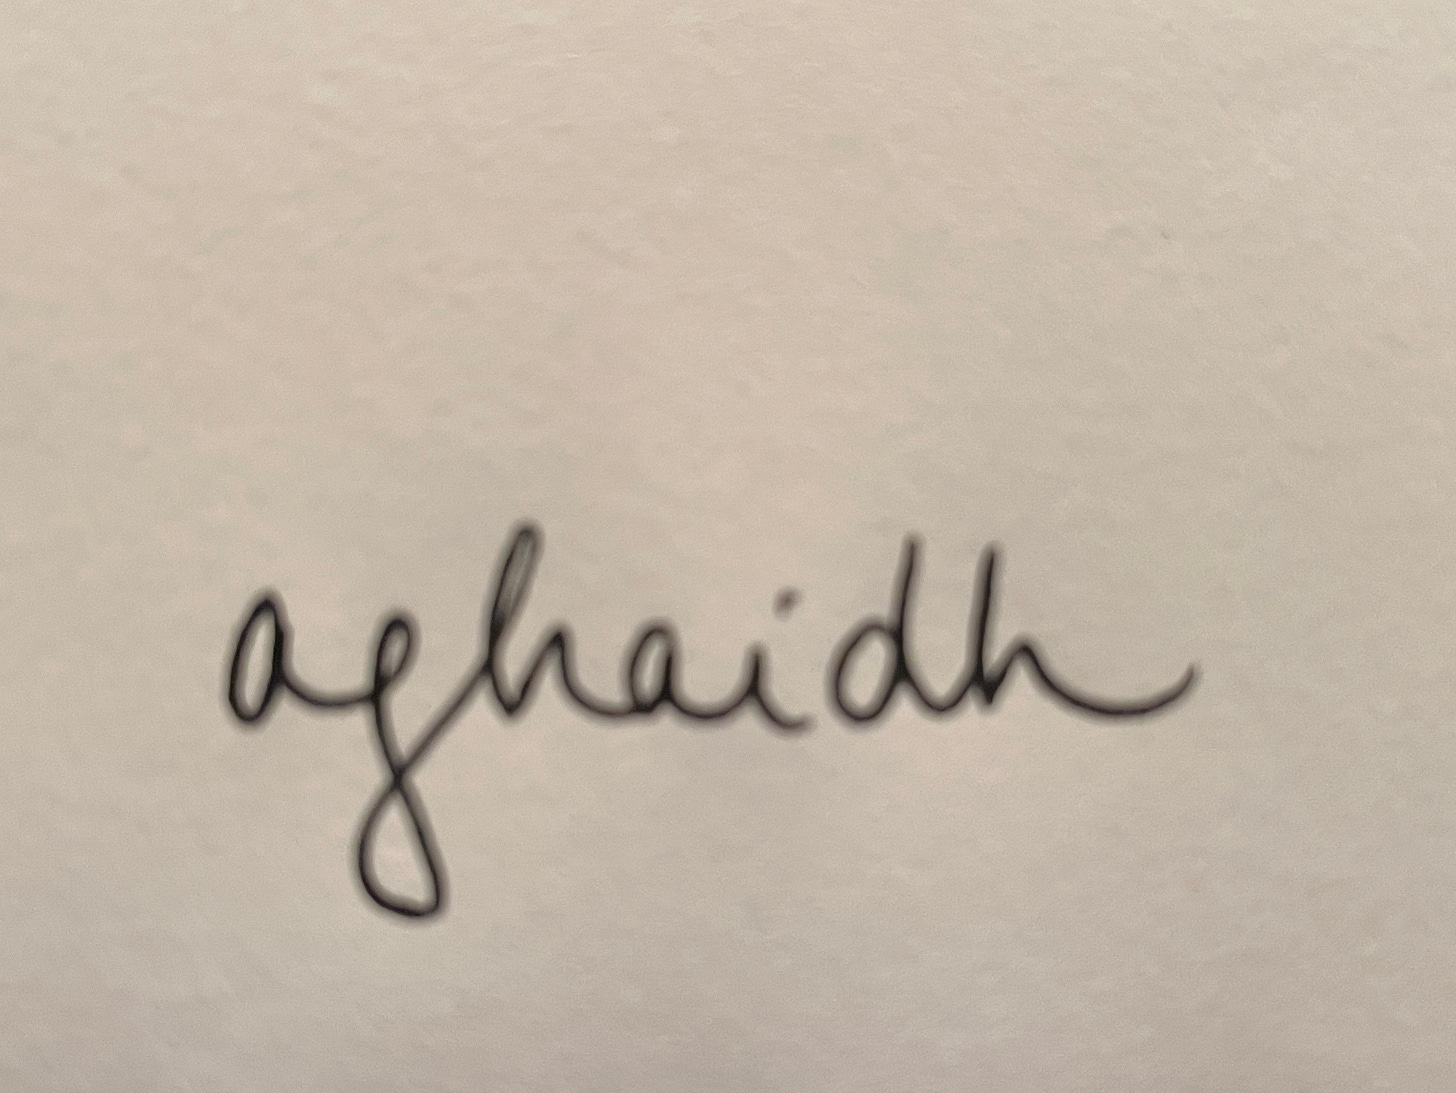 the word “aghaidh,” handwritten in black on a white background